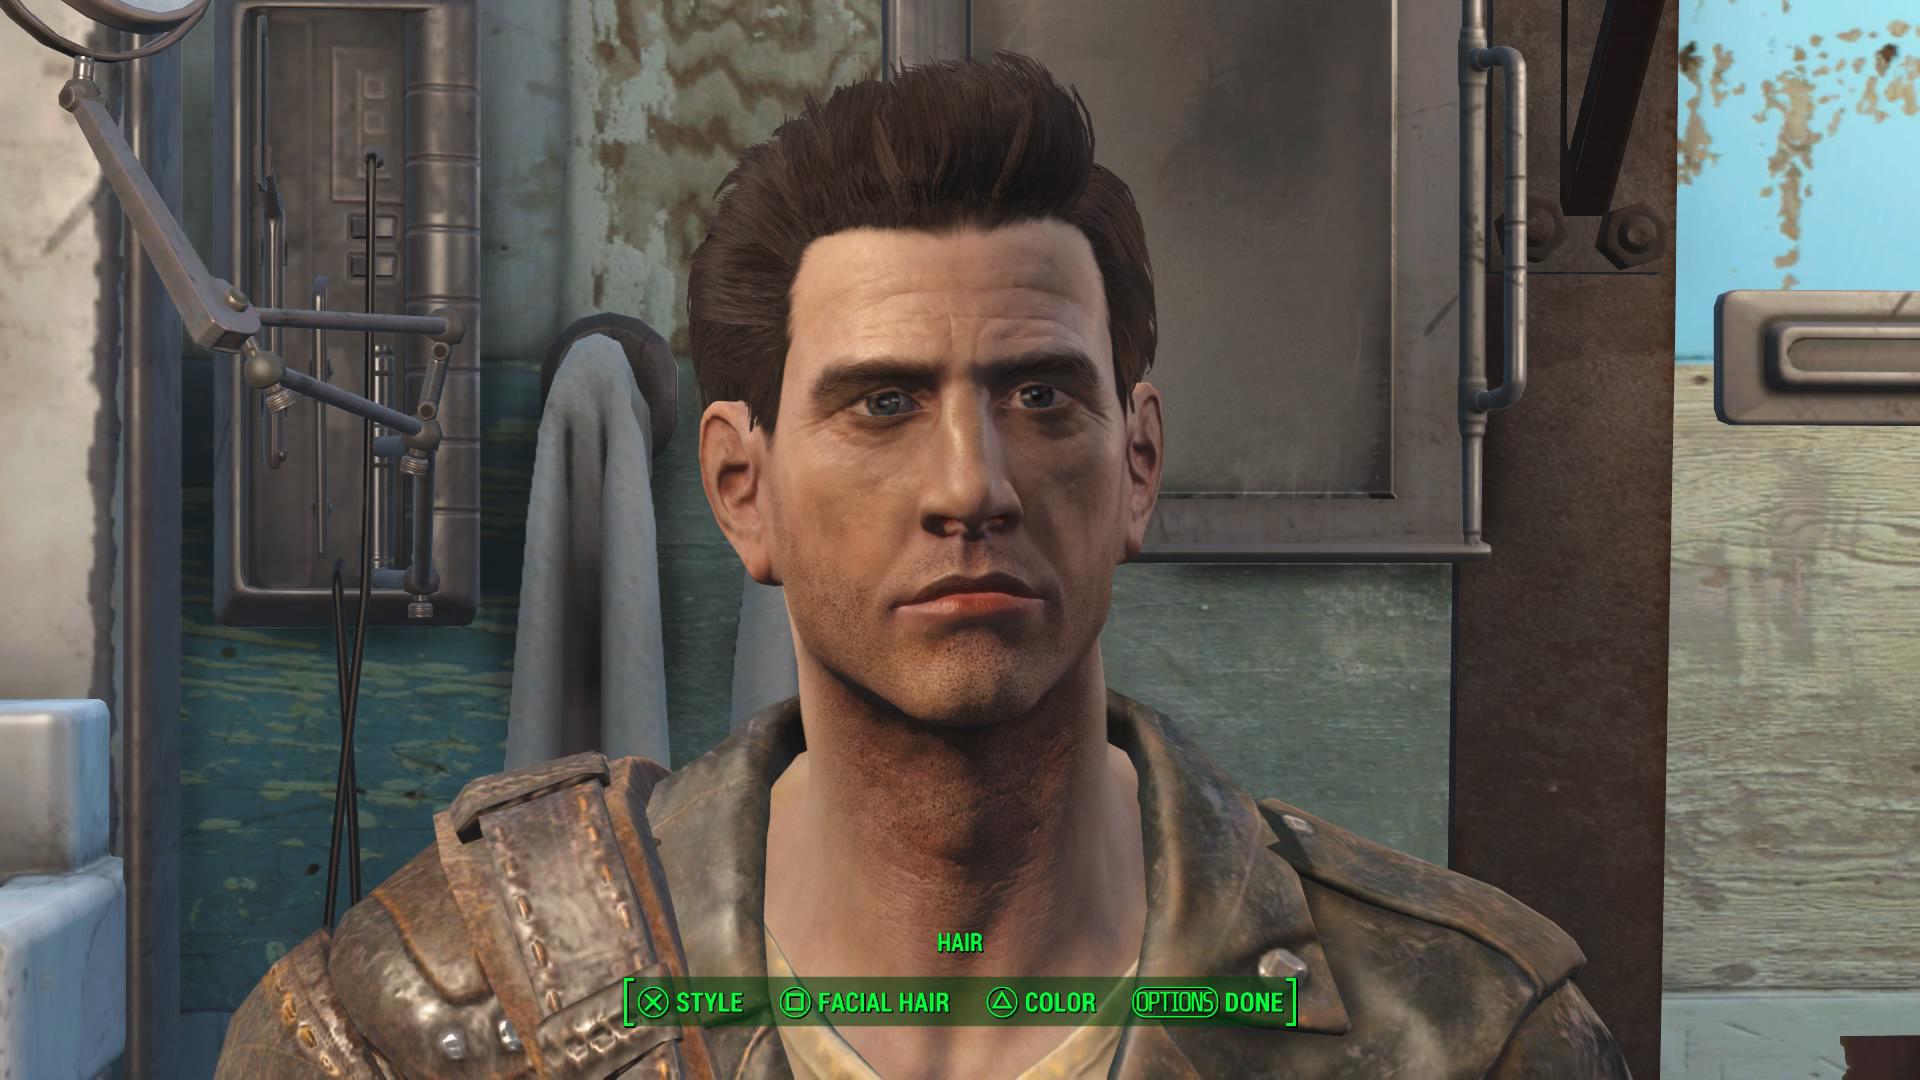 [FALLOUT 4] - Mad Max -Mel Gibson updated | Scrolller